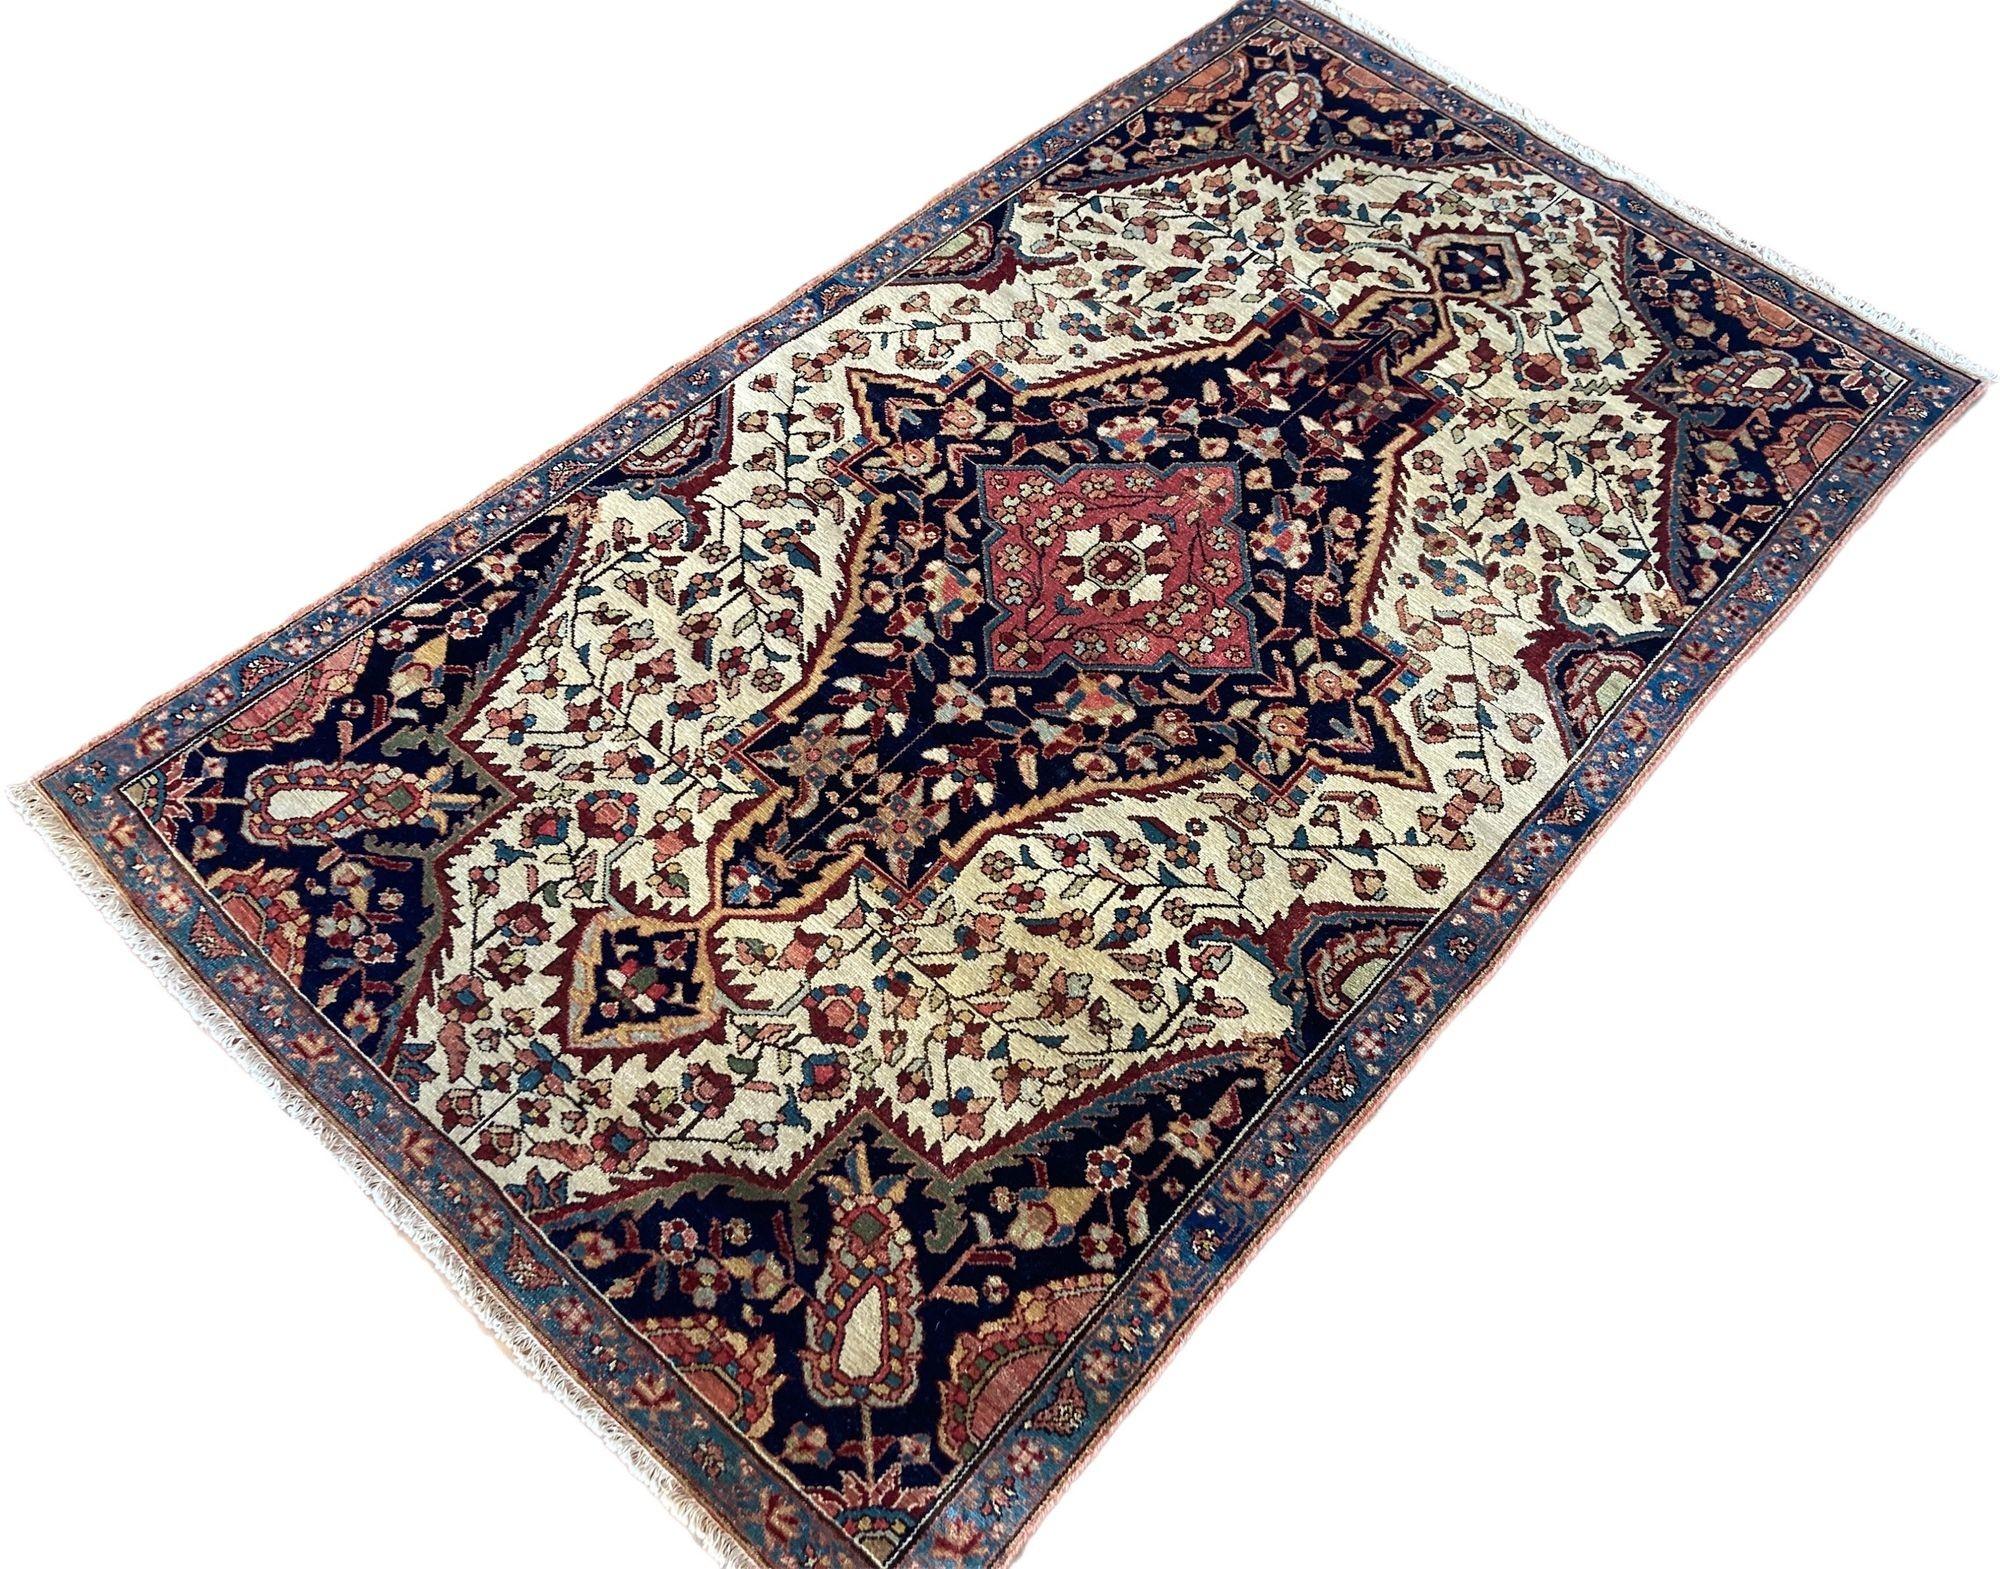 Antique Malayer Rug 1.66m X 0.98m In Good Condition For Sale In St. Albans, GB